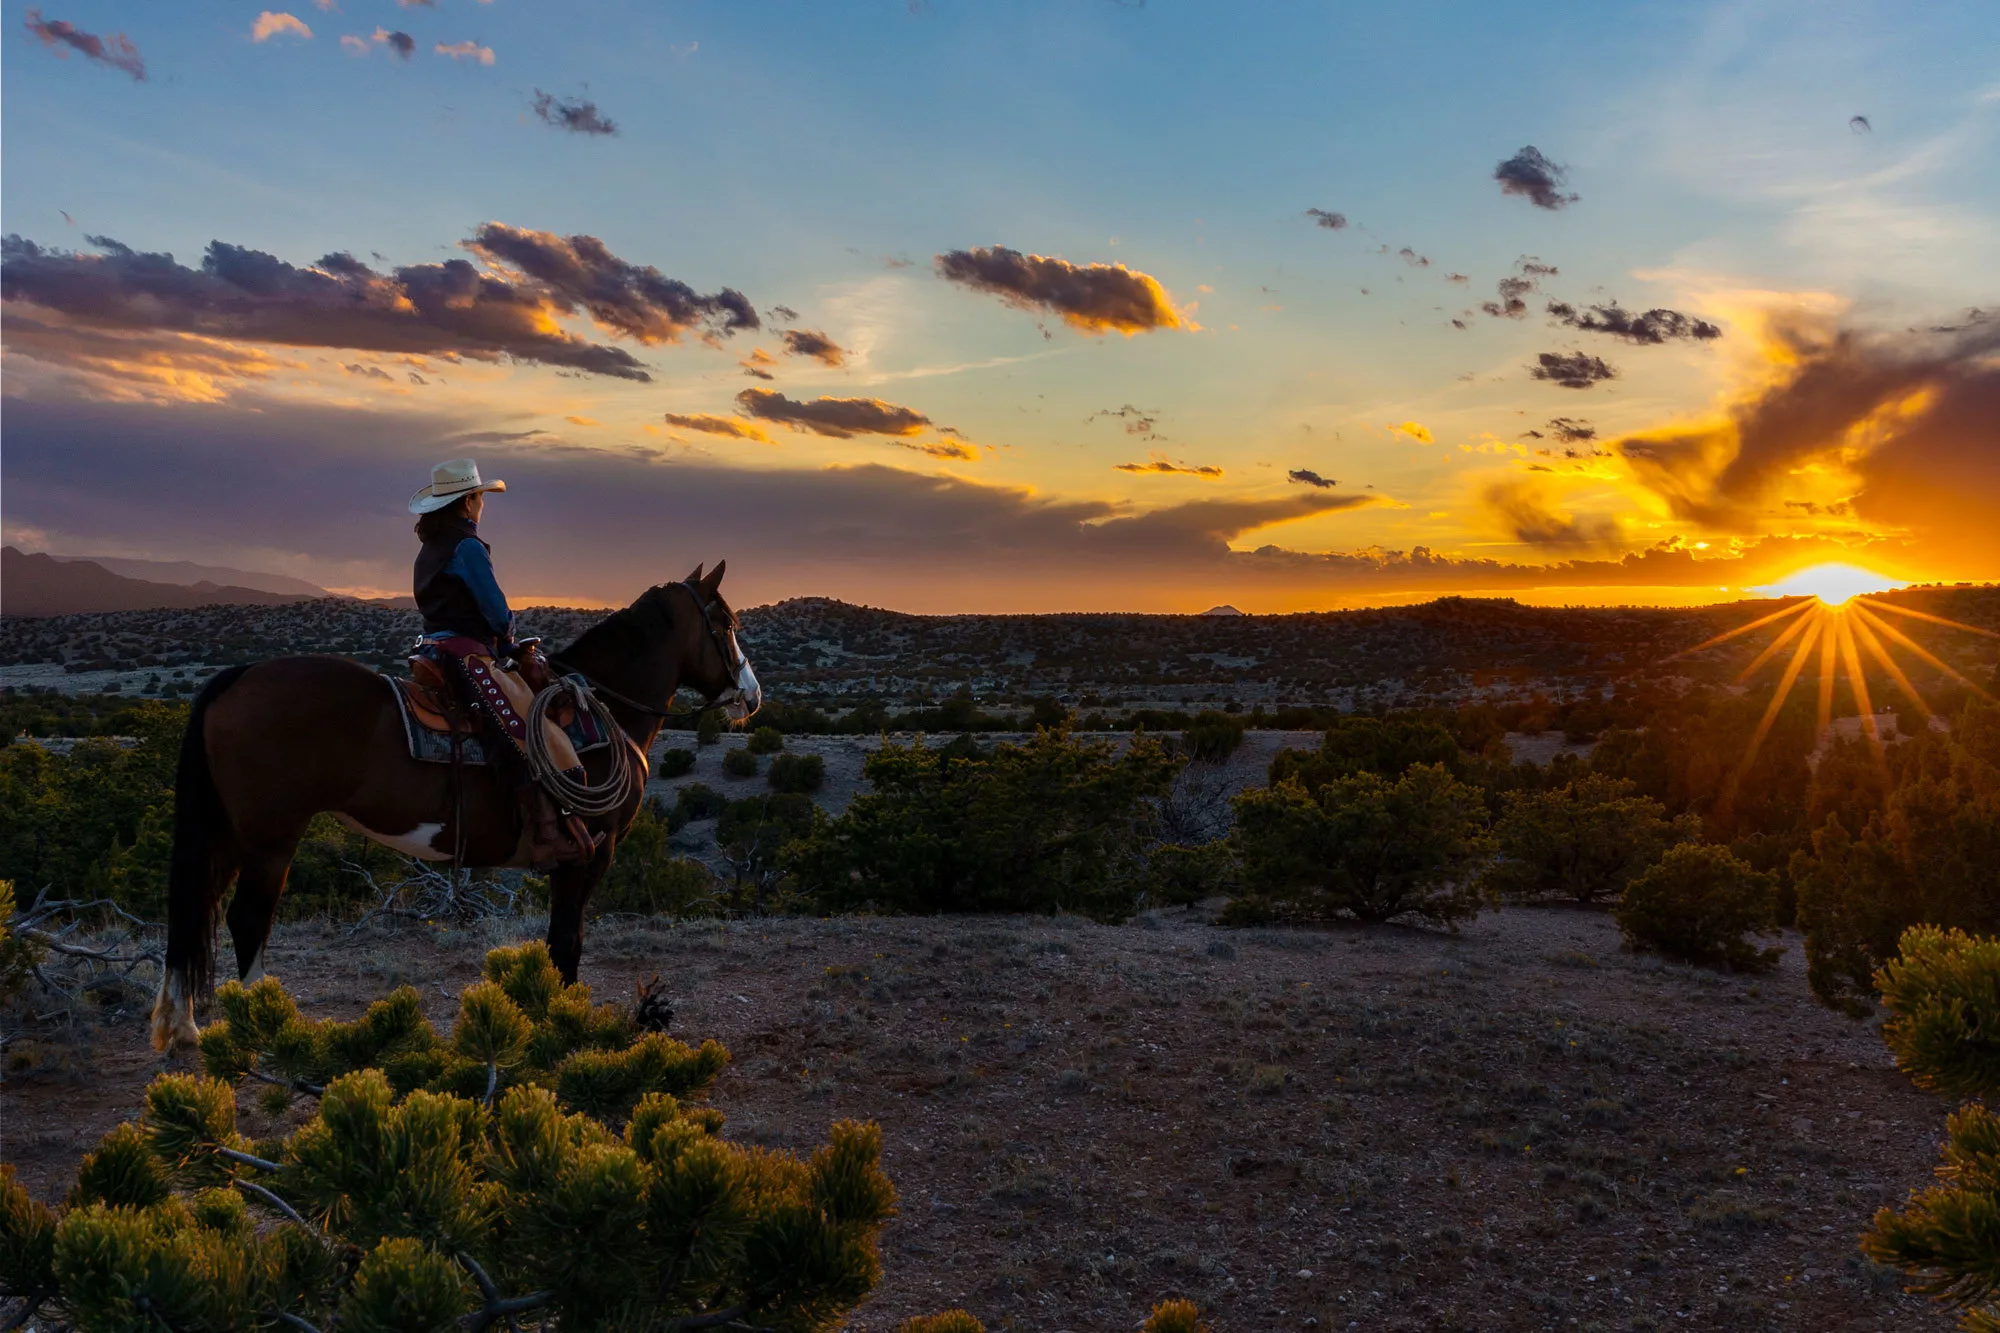 Woman on horse in New Mexico at sunset